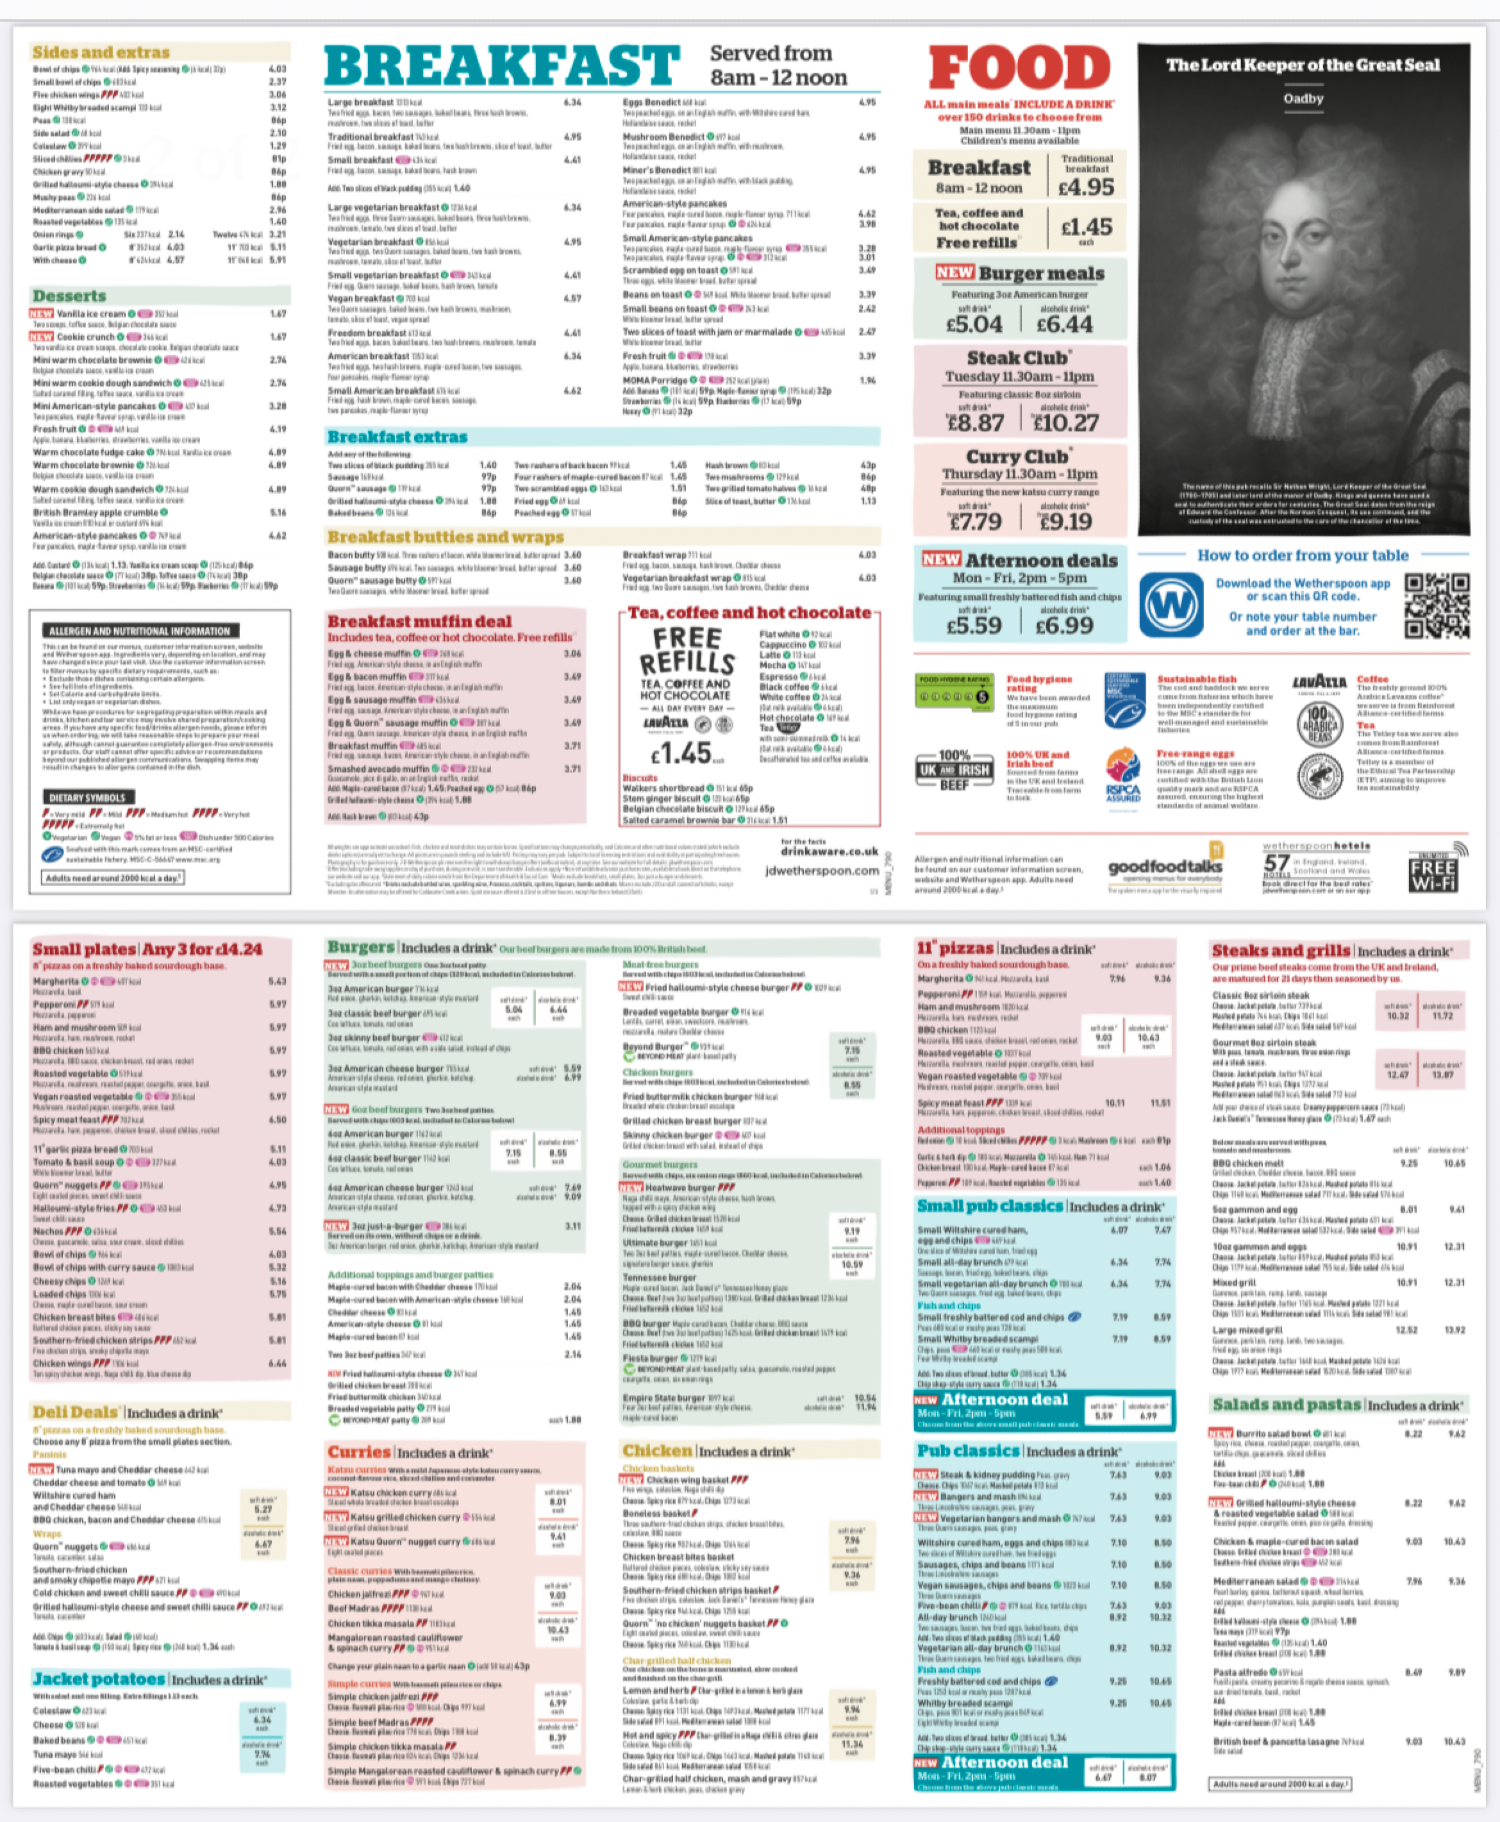 Takeaway Restaurant Menu Page - Wetherspoons – The Lord Keeper of the Great Seal - Leicester